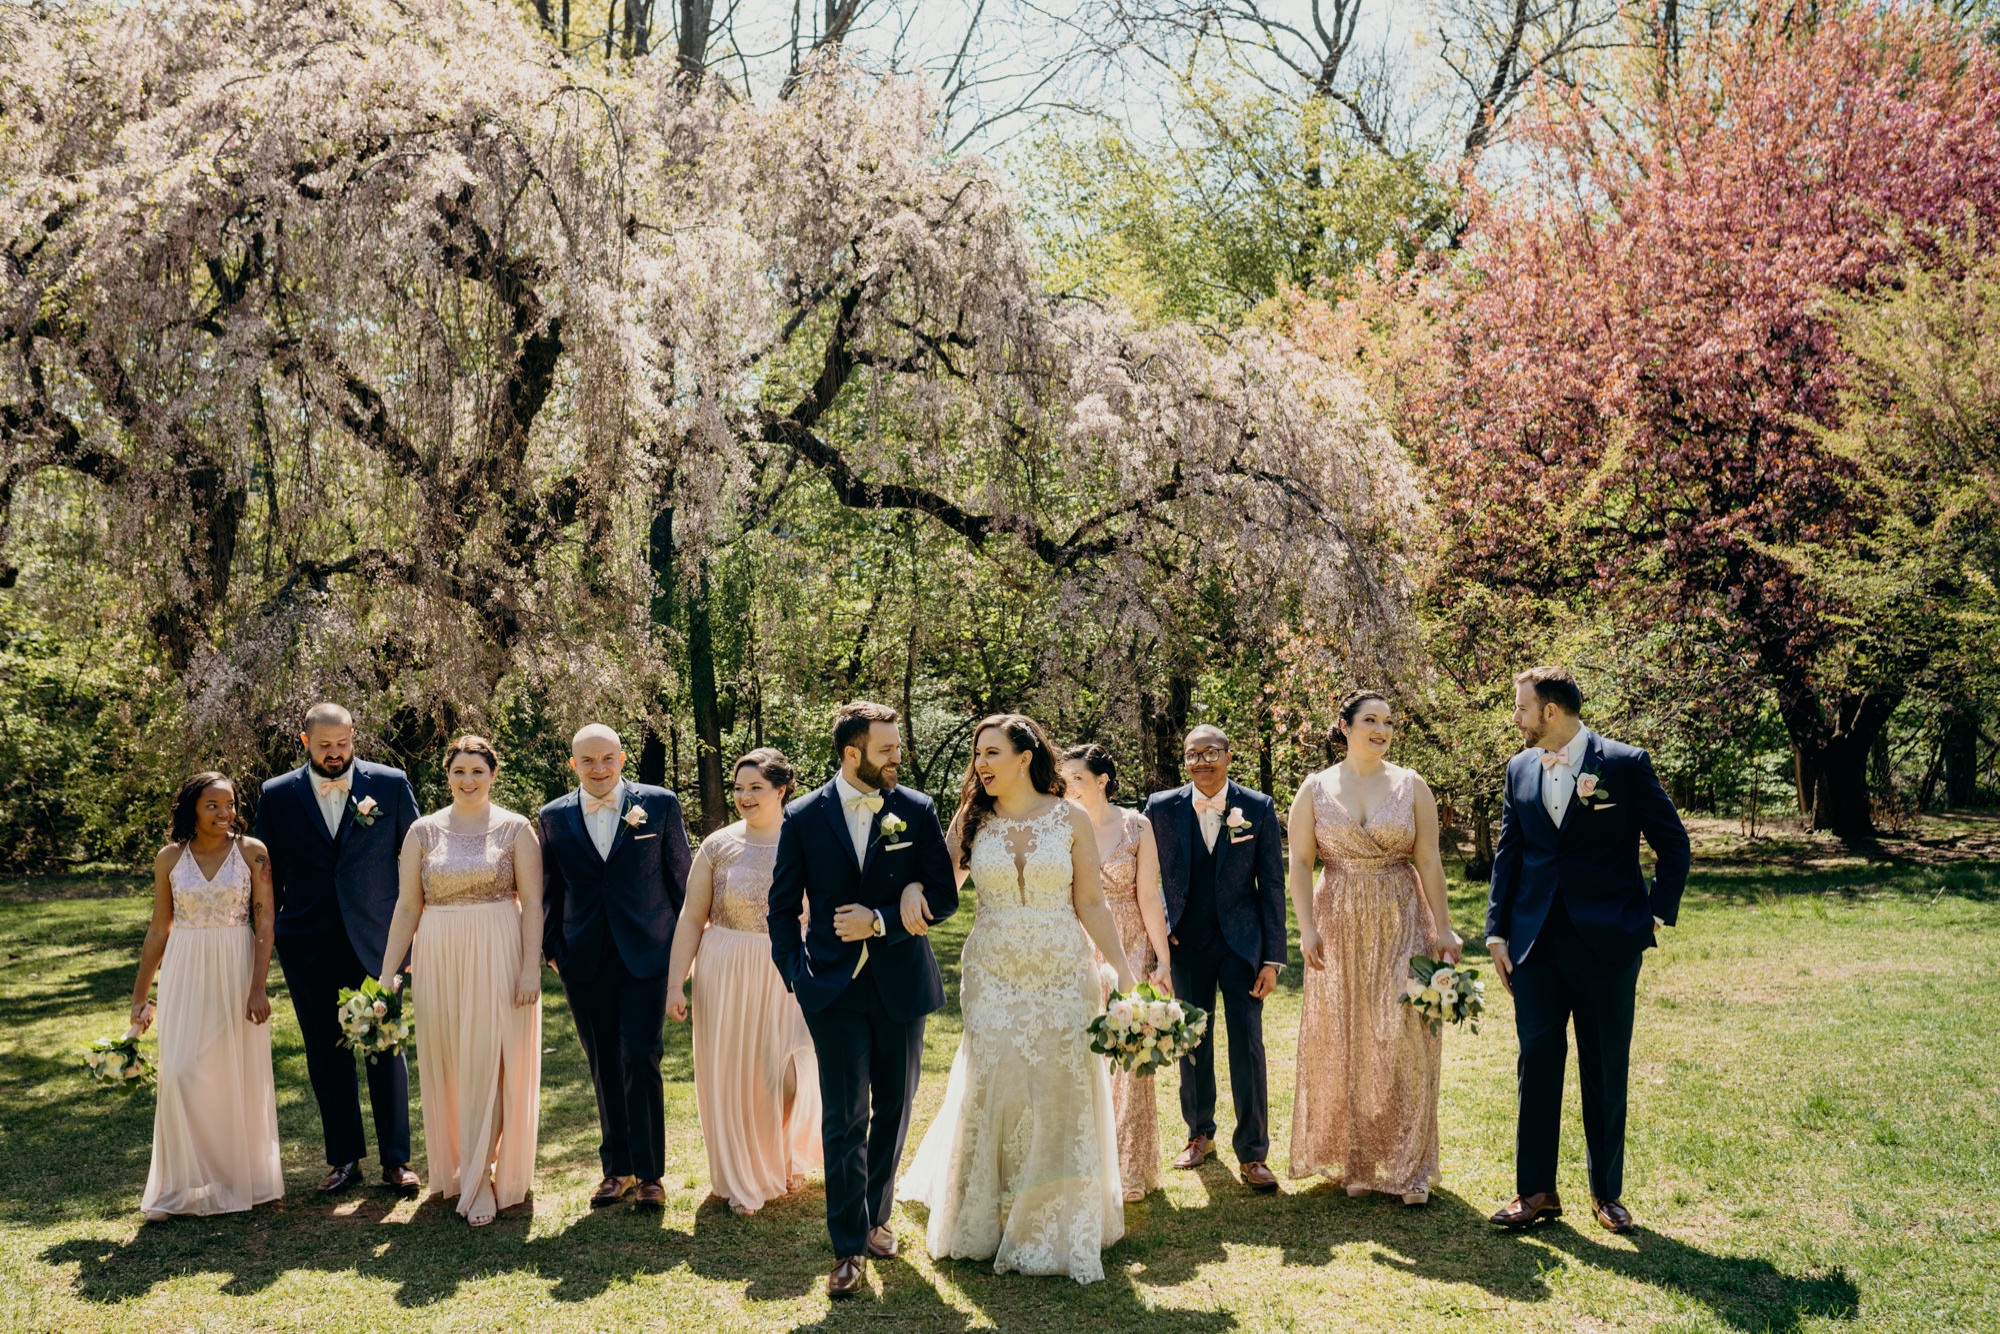 portrait of a bridal party at a park in new jersey during spring